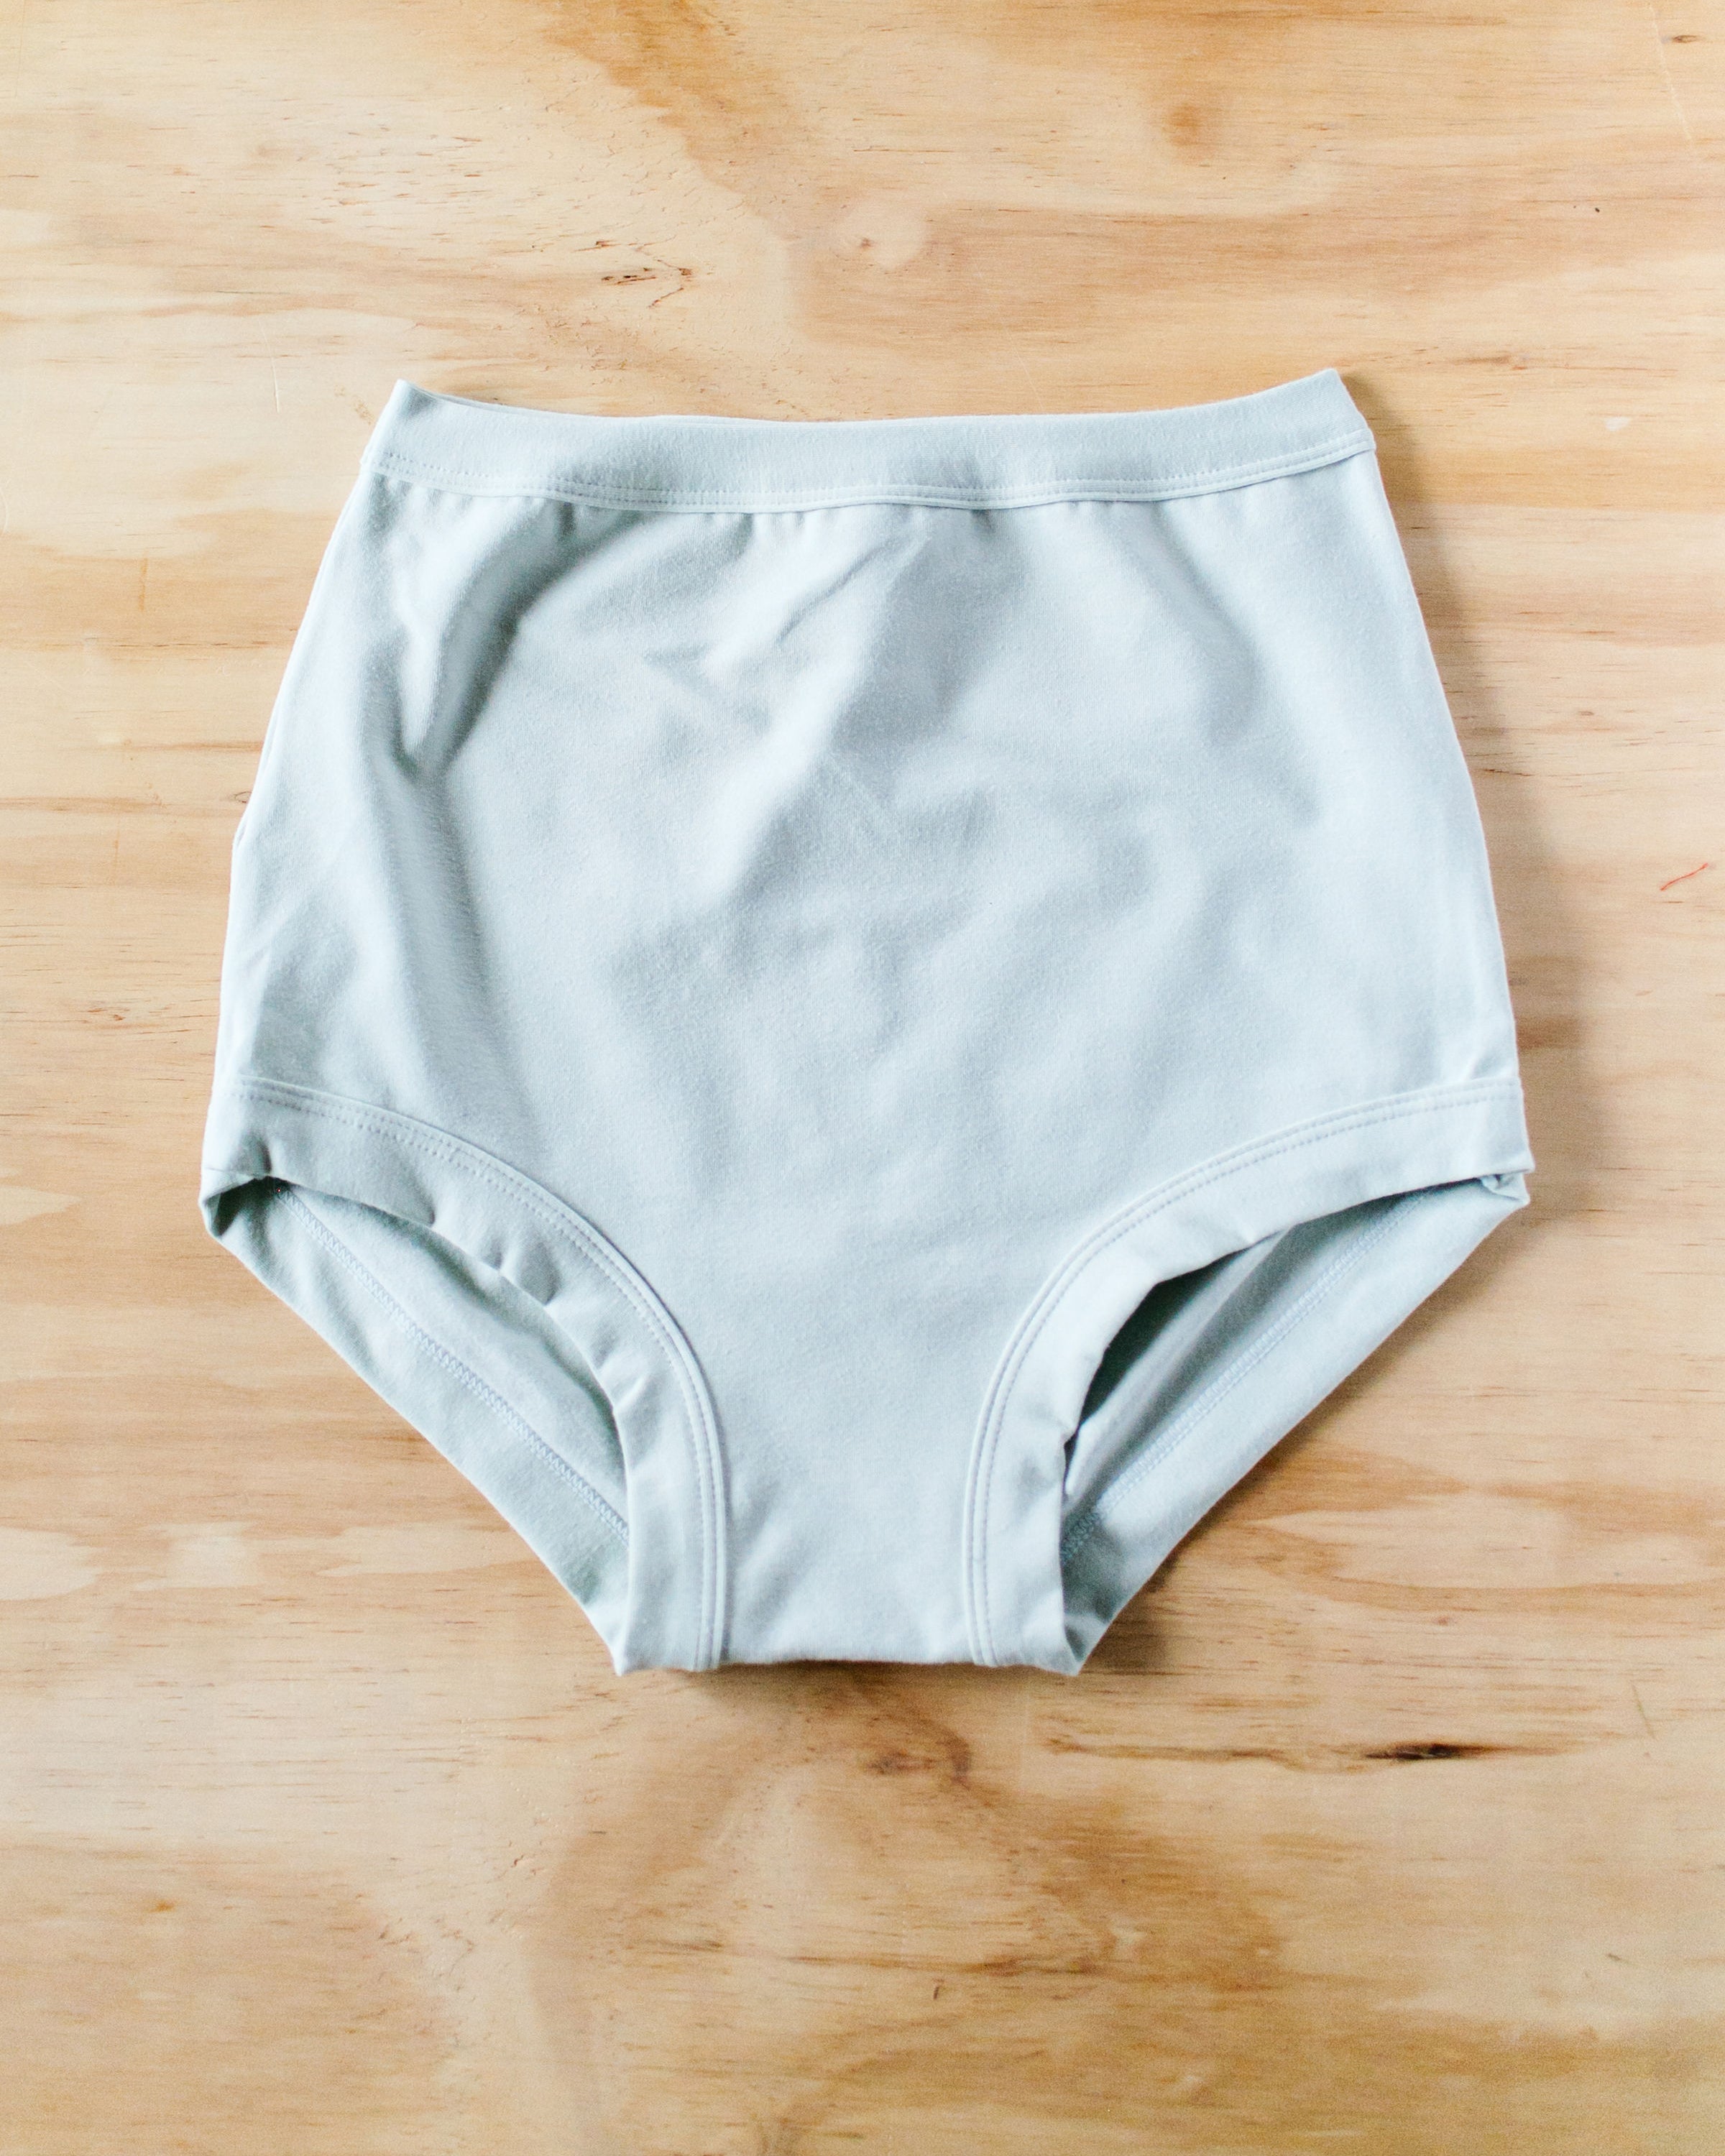 Flat lay of Thunderpants organic cotton Sky Rise style underwear in Dried Sage color.